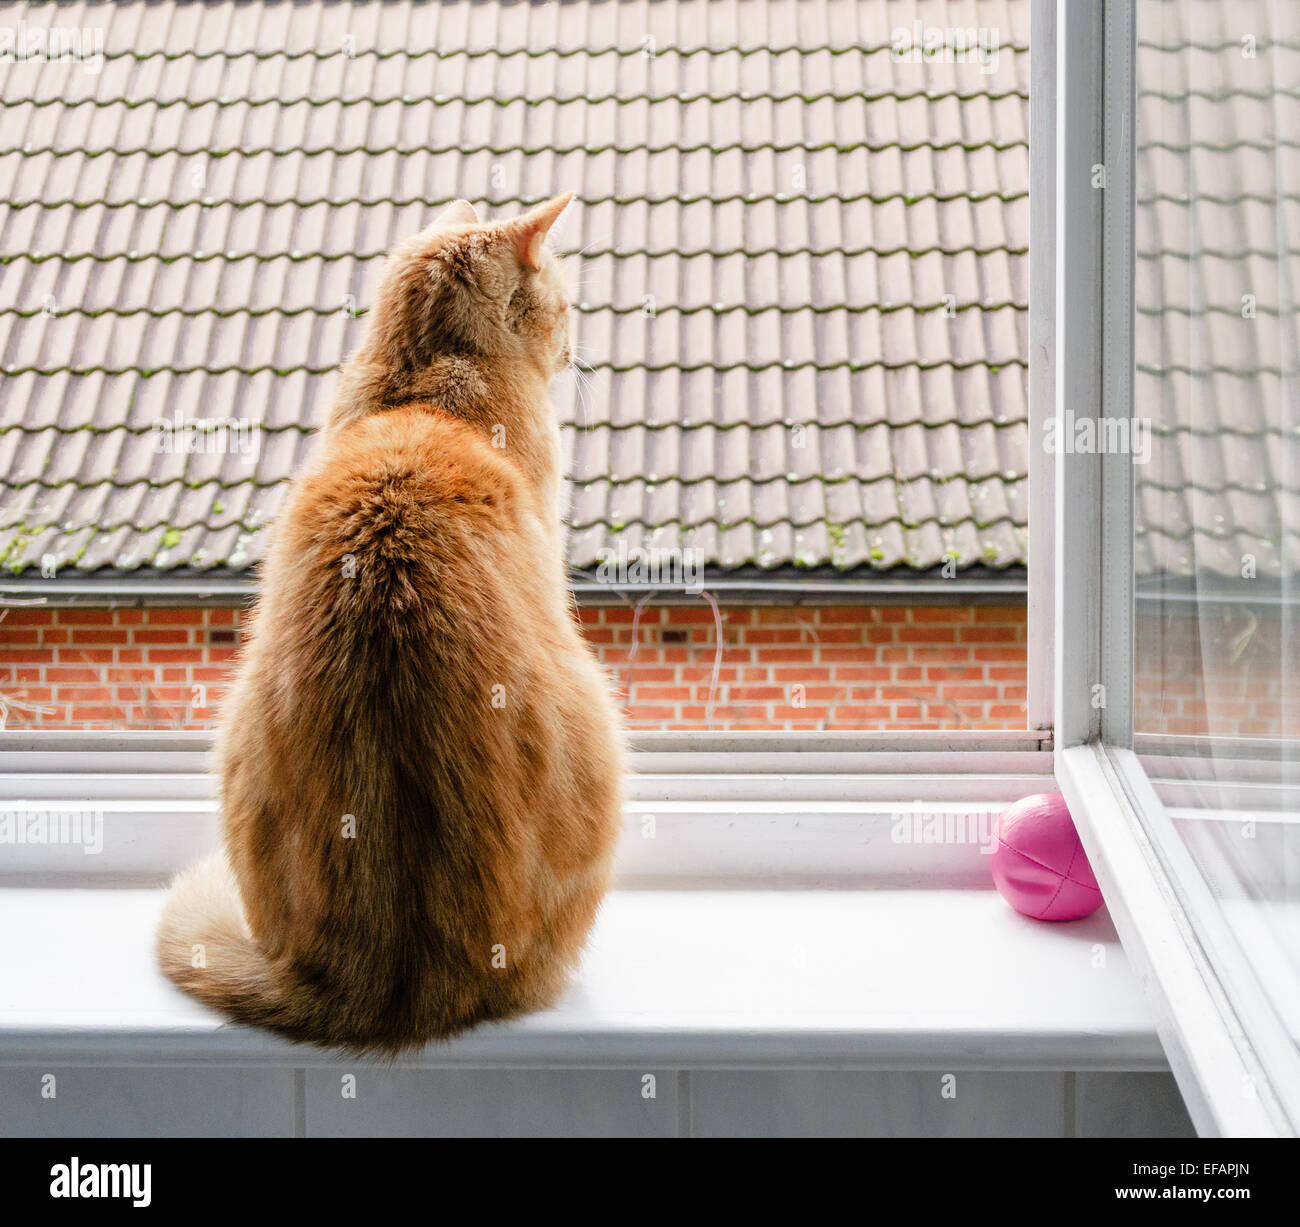 A cat looking out of a window, photo: January 04, 2015. Stock Photo